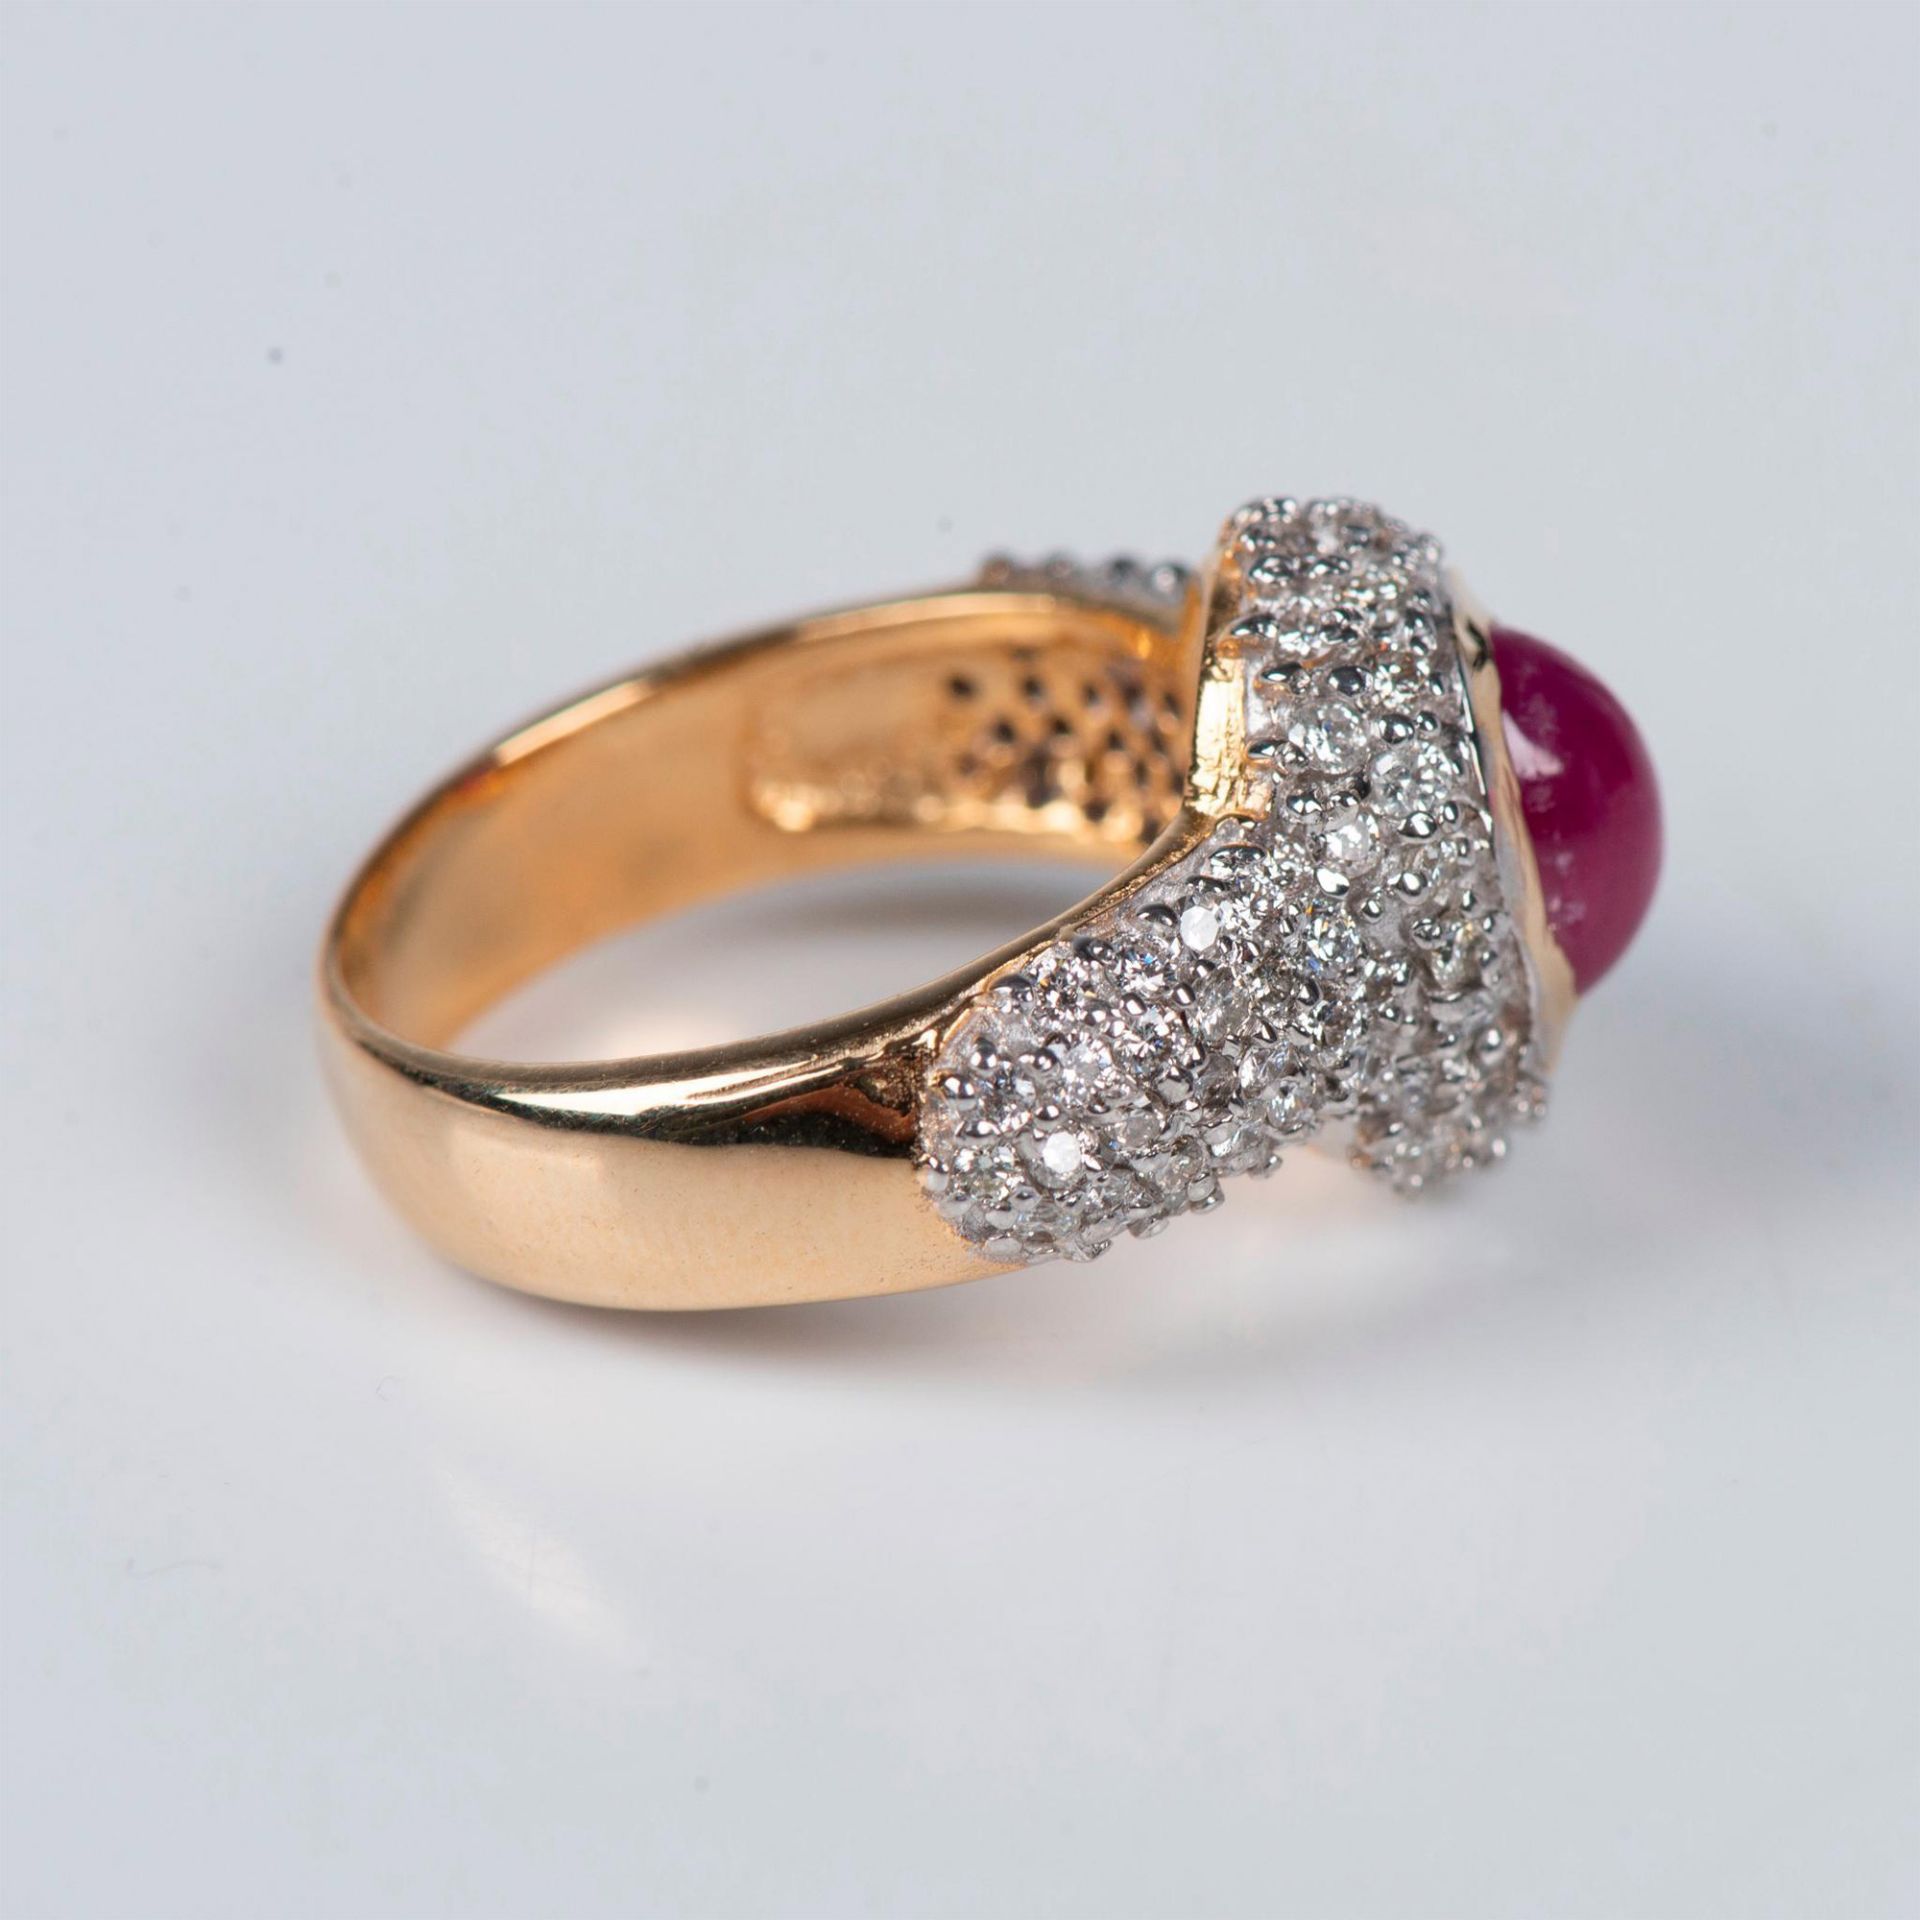 Fabulous 14K Yellow Gold, Diamond, and Ruby 2.9ctw Ring - Image 7 of 11